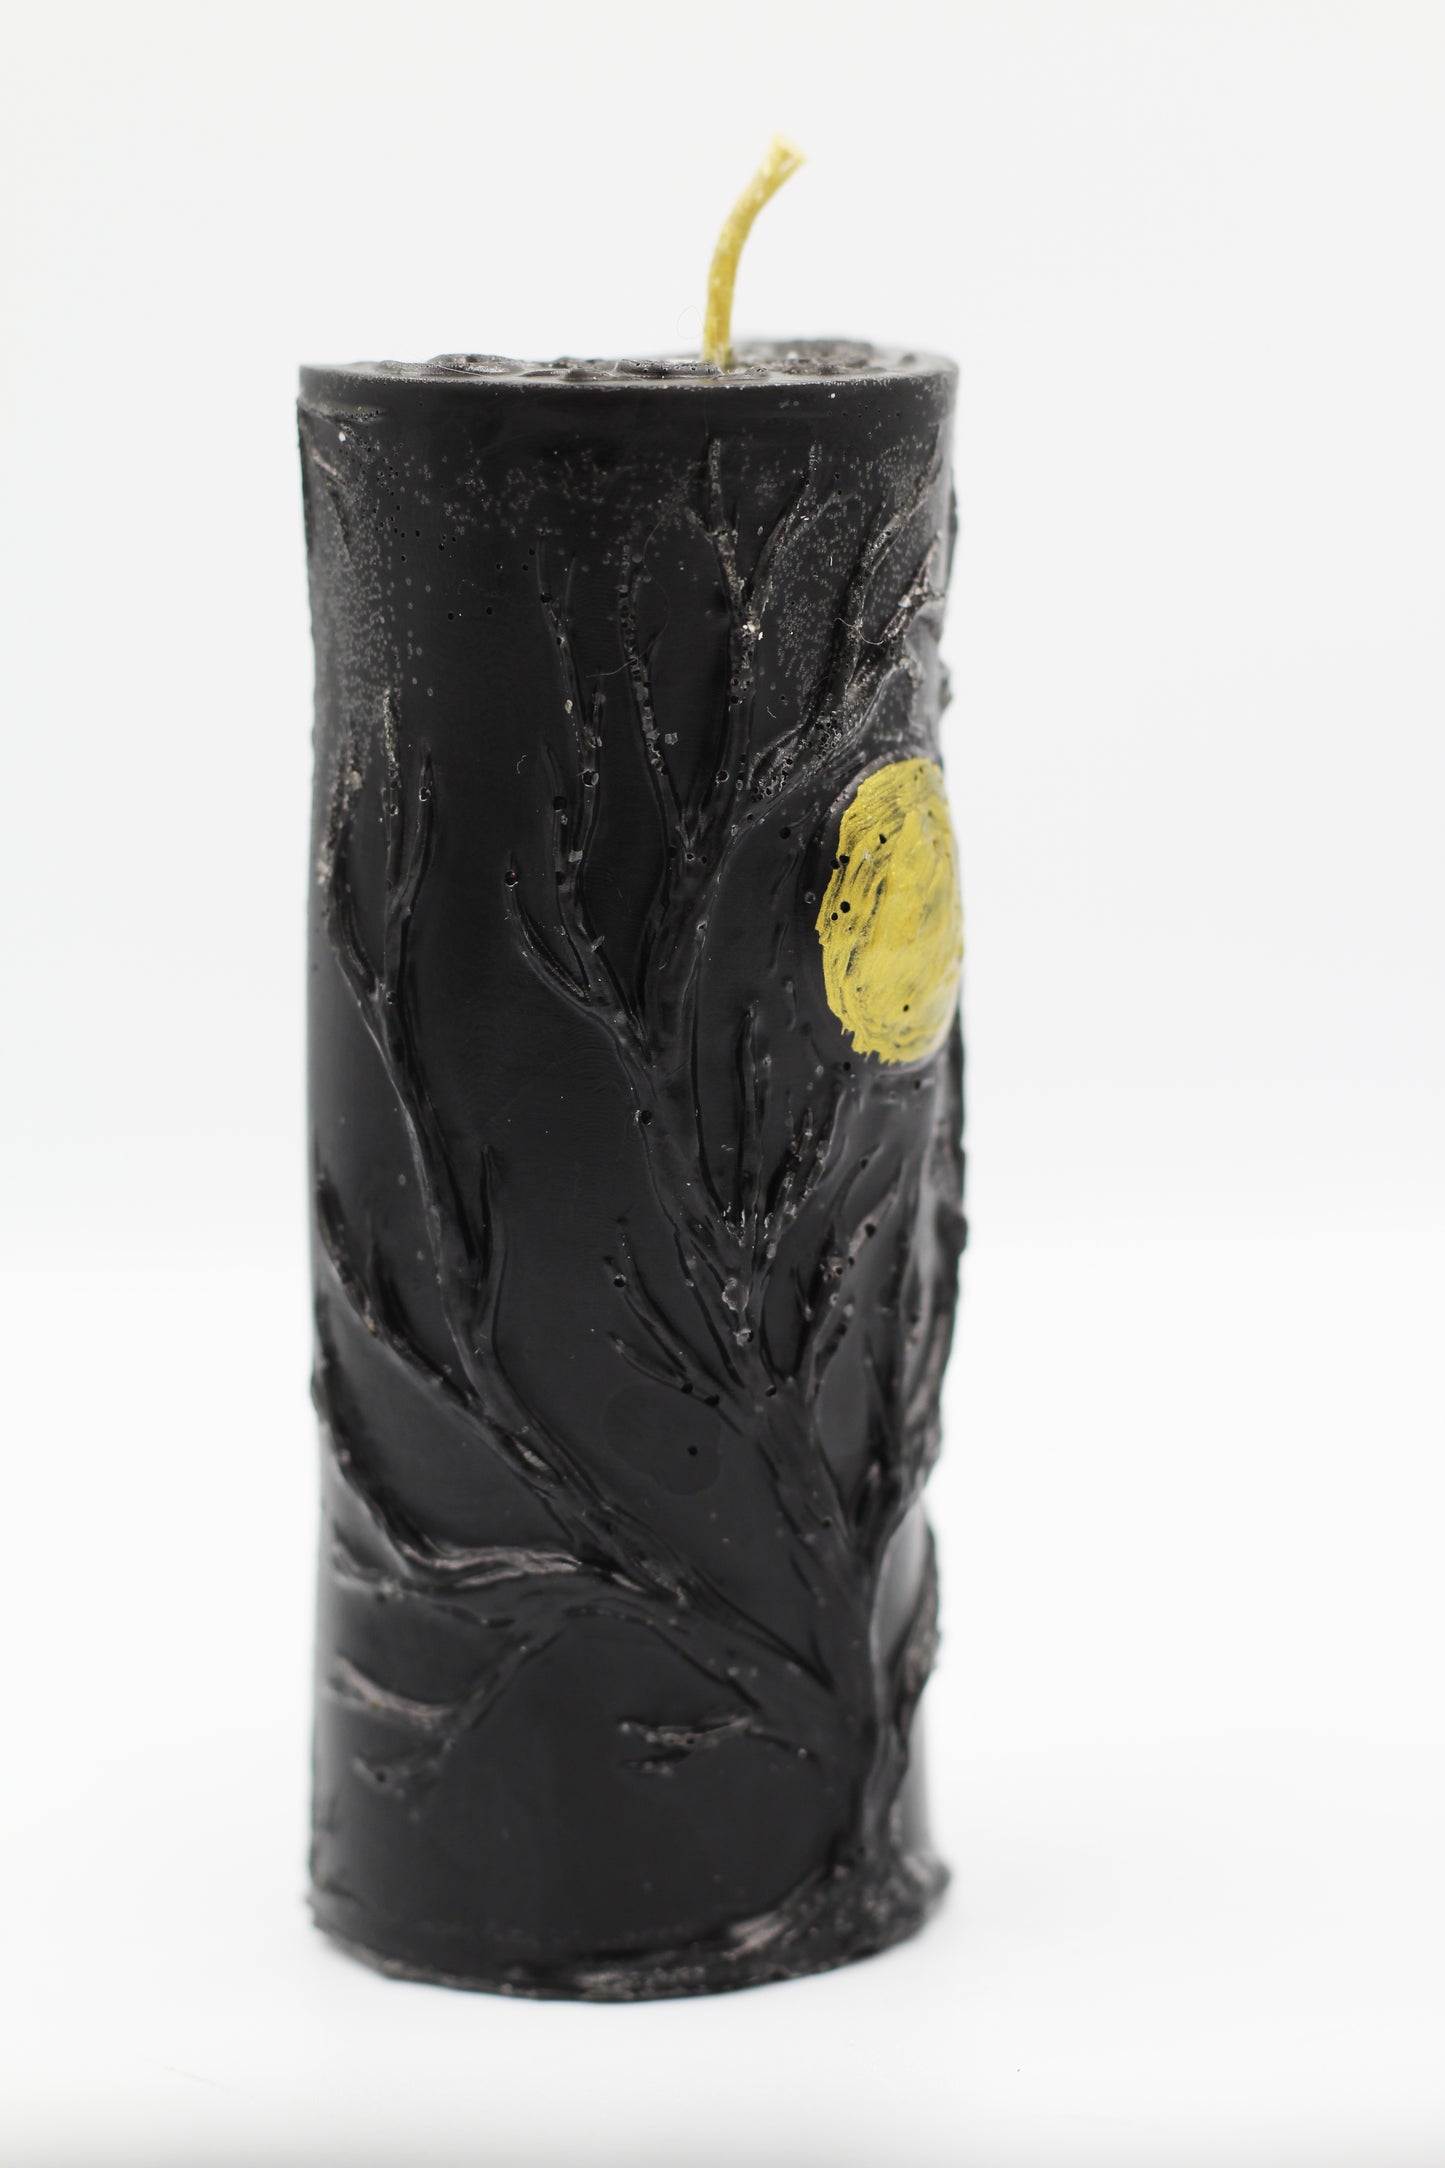 Hekas Creative - Inset Curved Moon Phases 100% Beeswax Hand Painted Candle